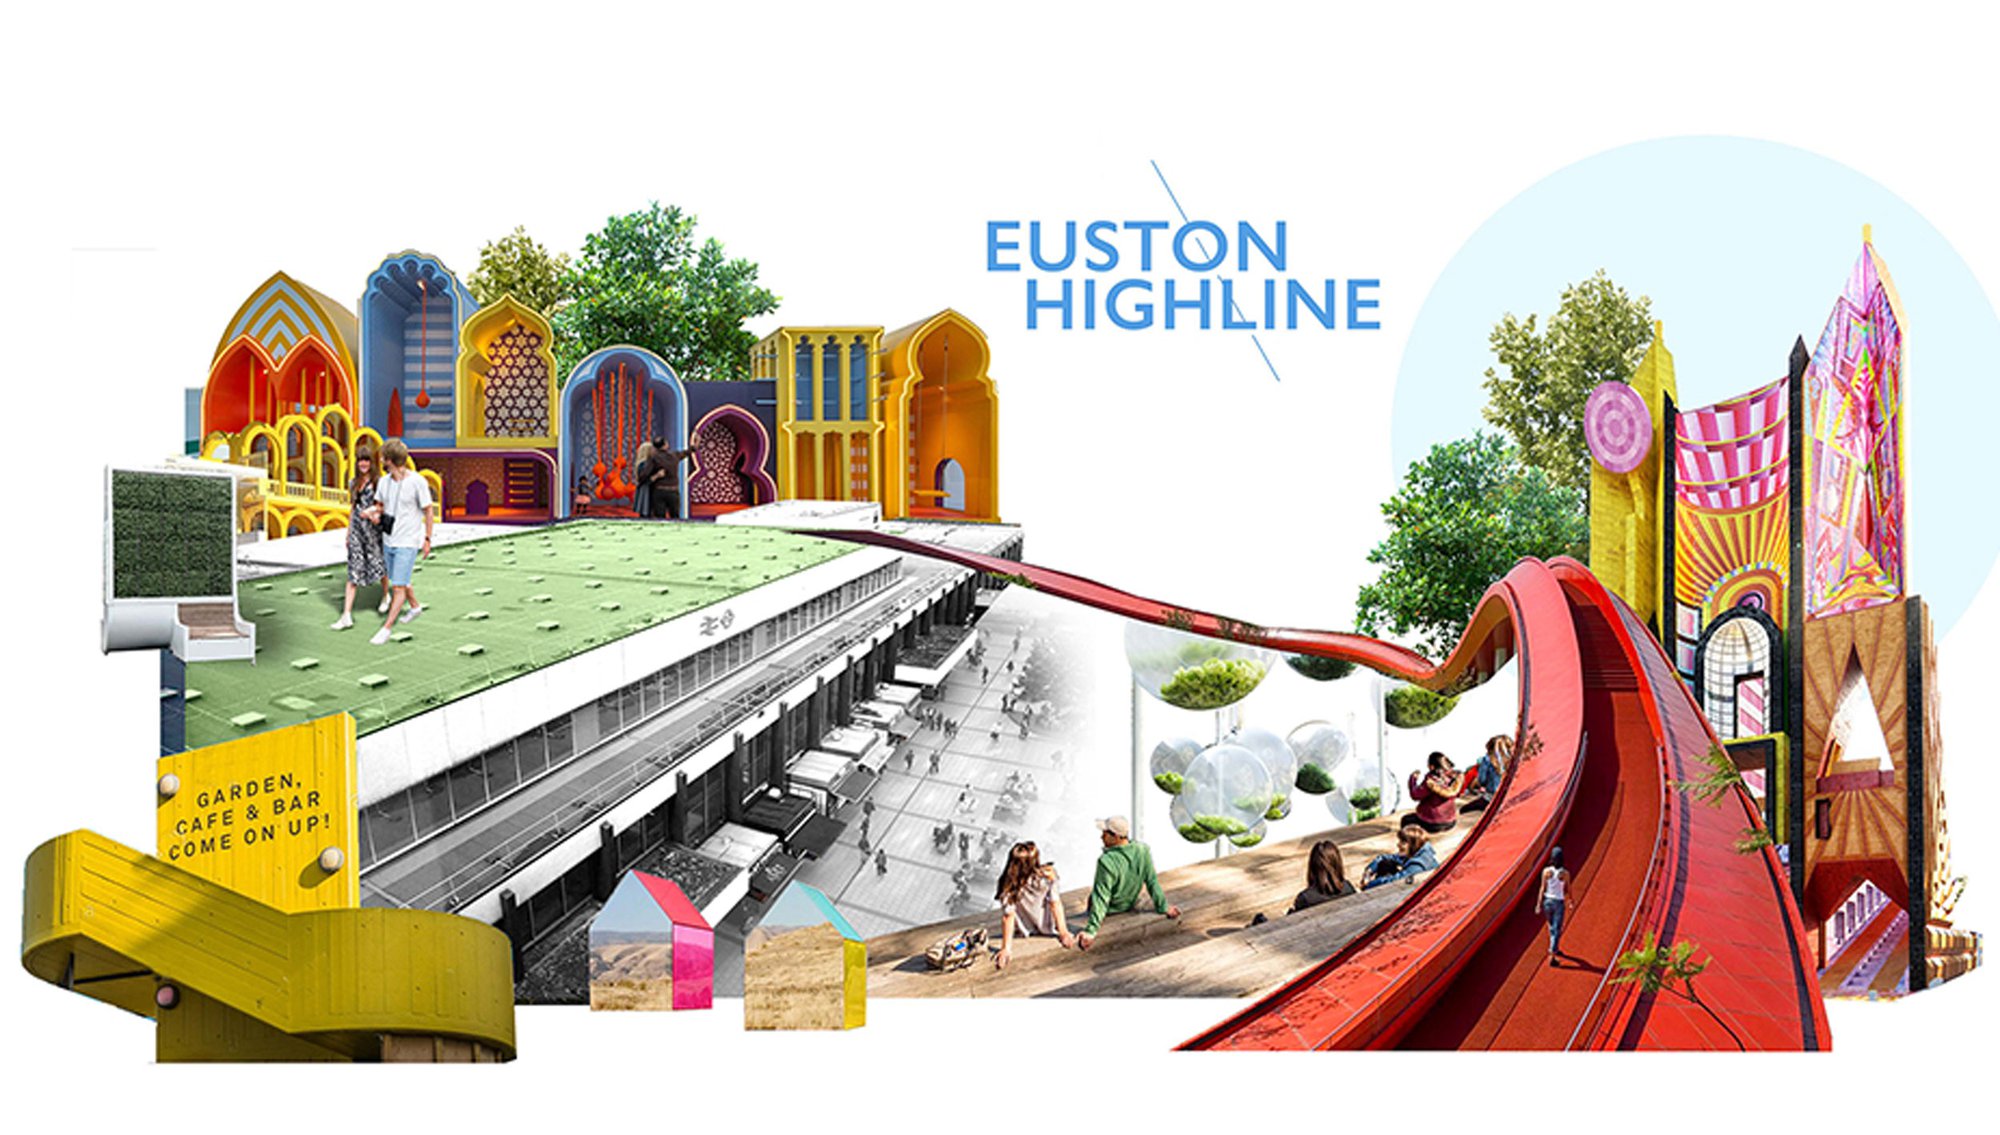 Hero images of Euston station showing a high line leading to the roof